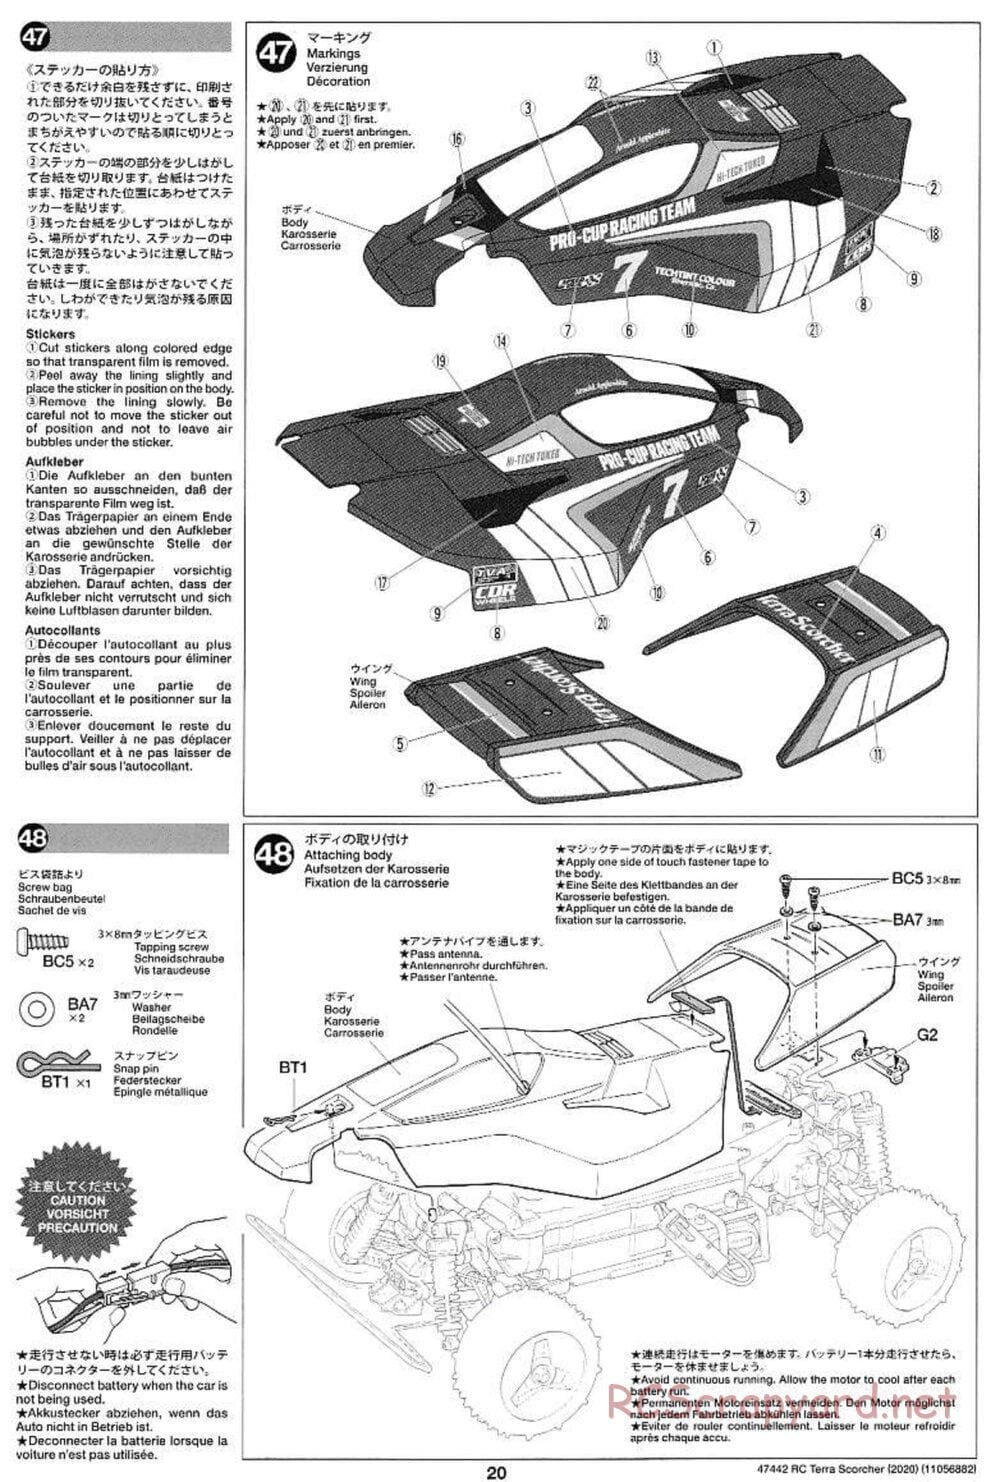 Tamiya - Terra Scorcher 2020 Chassis - Manual - Page 20